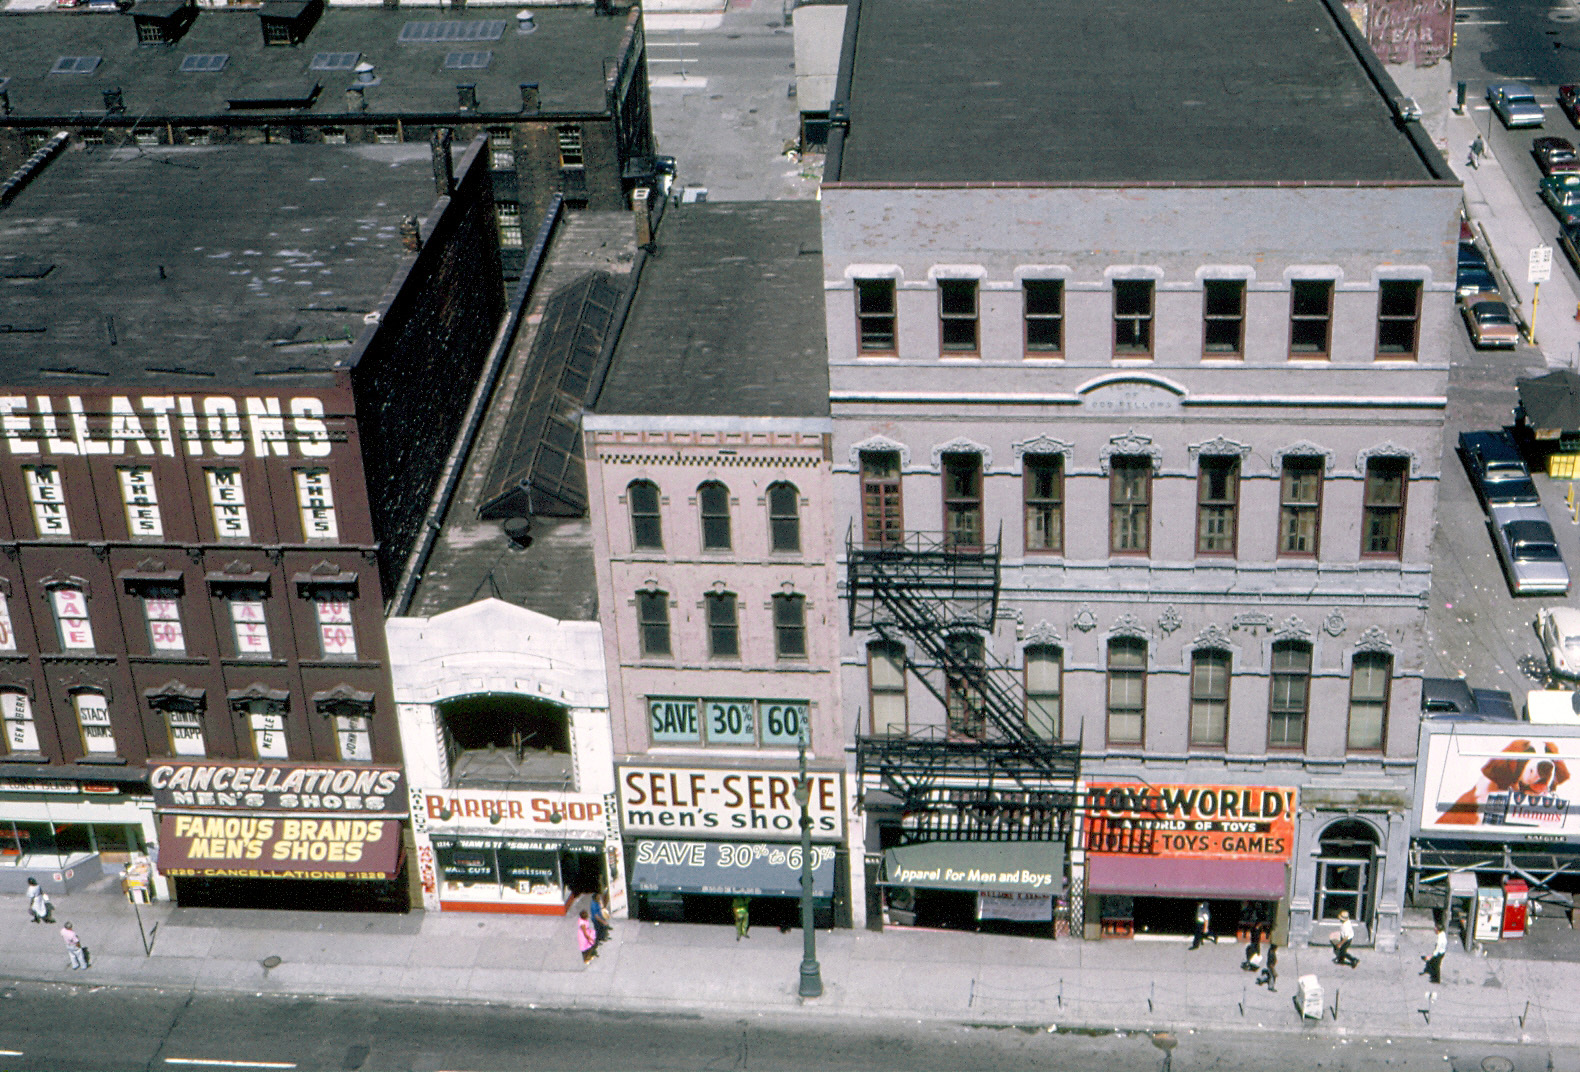 The building on the right is the former Odd Fellows Temple, built in 1874 at the northeast corner of Randolph and Monroe Streets in Detroit, Michigan.  Today it houses a Buffalo Wild Wings restaurant.

This is a scan of a Kodachrome transparency that was taken in July 1968 from the roof of Crowley's Department Store, which was demolished in 1978. View full size.